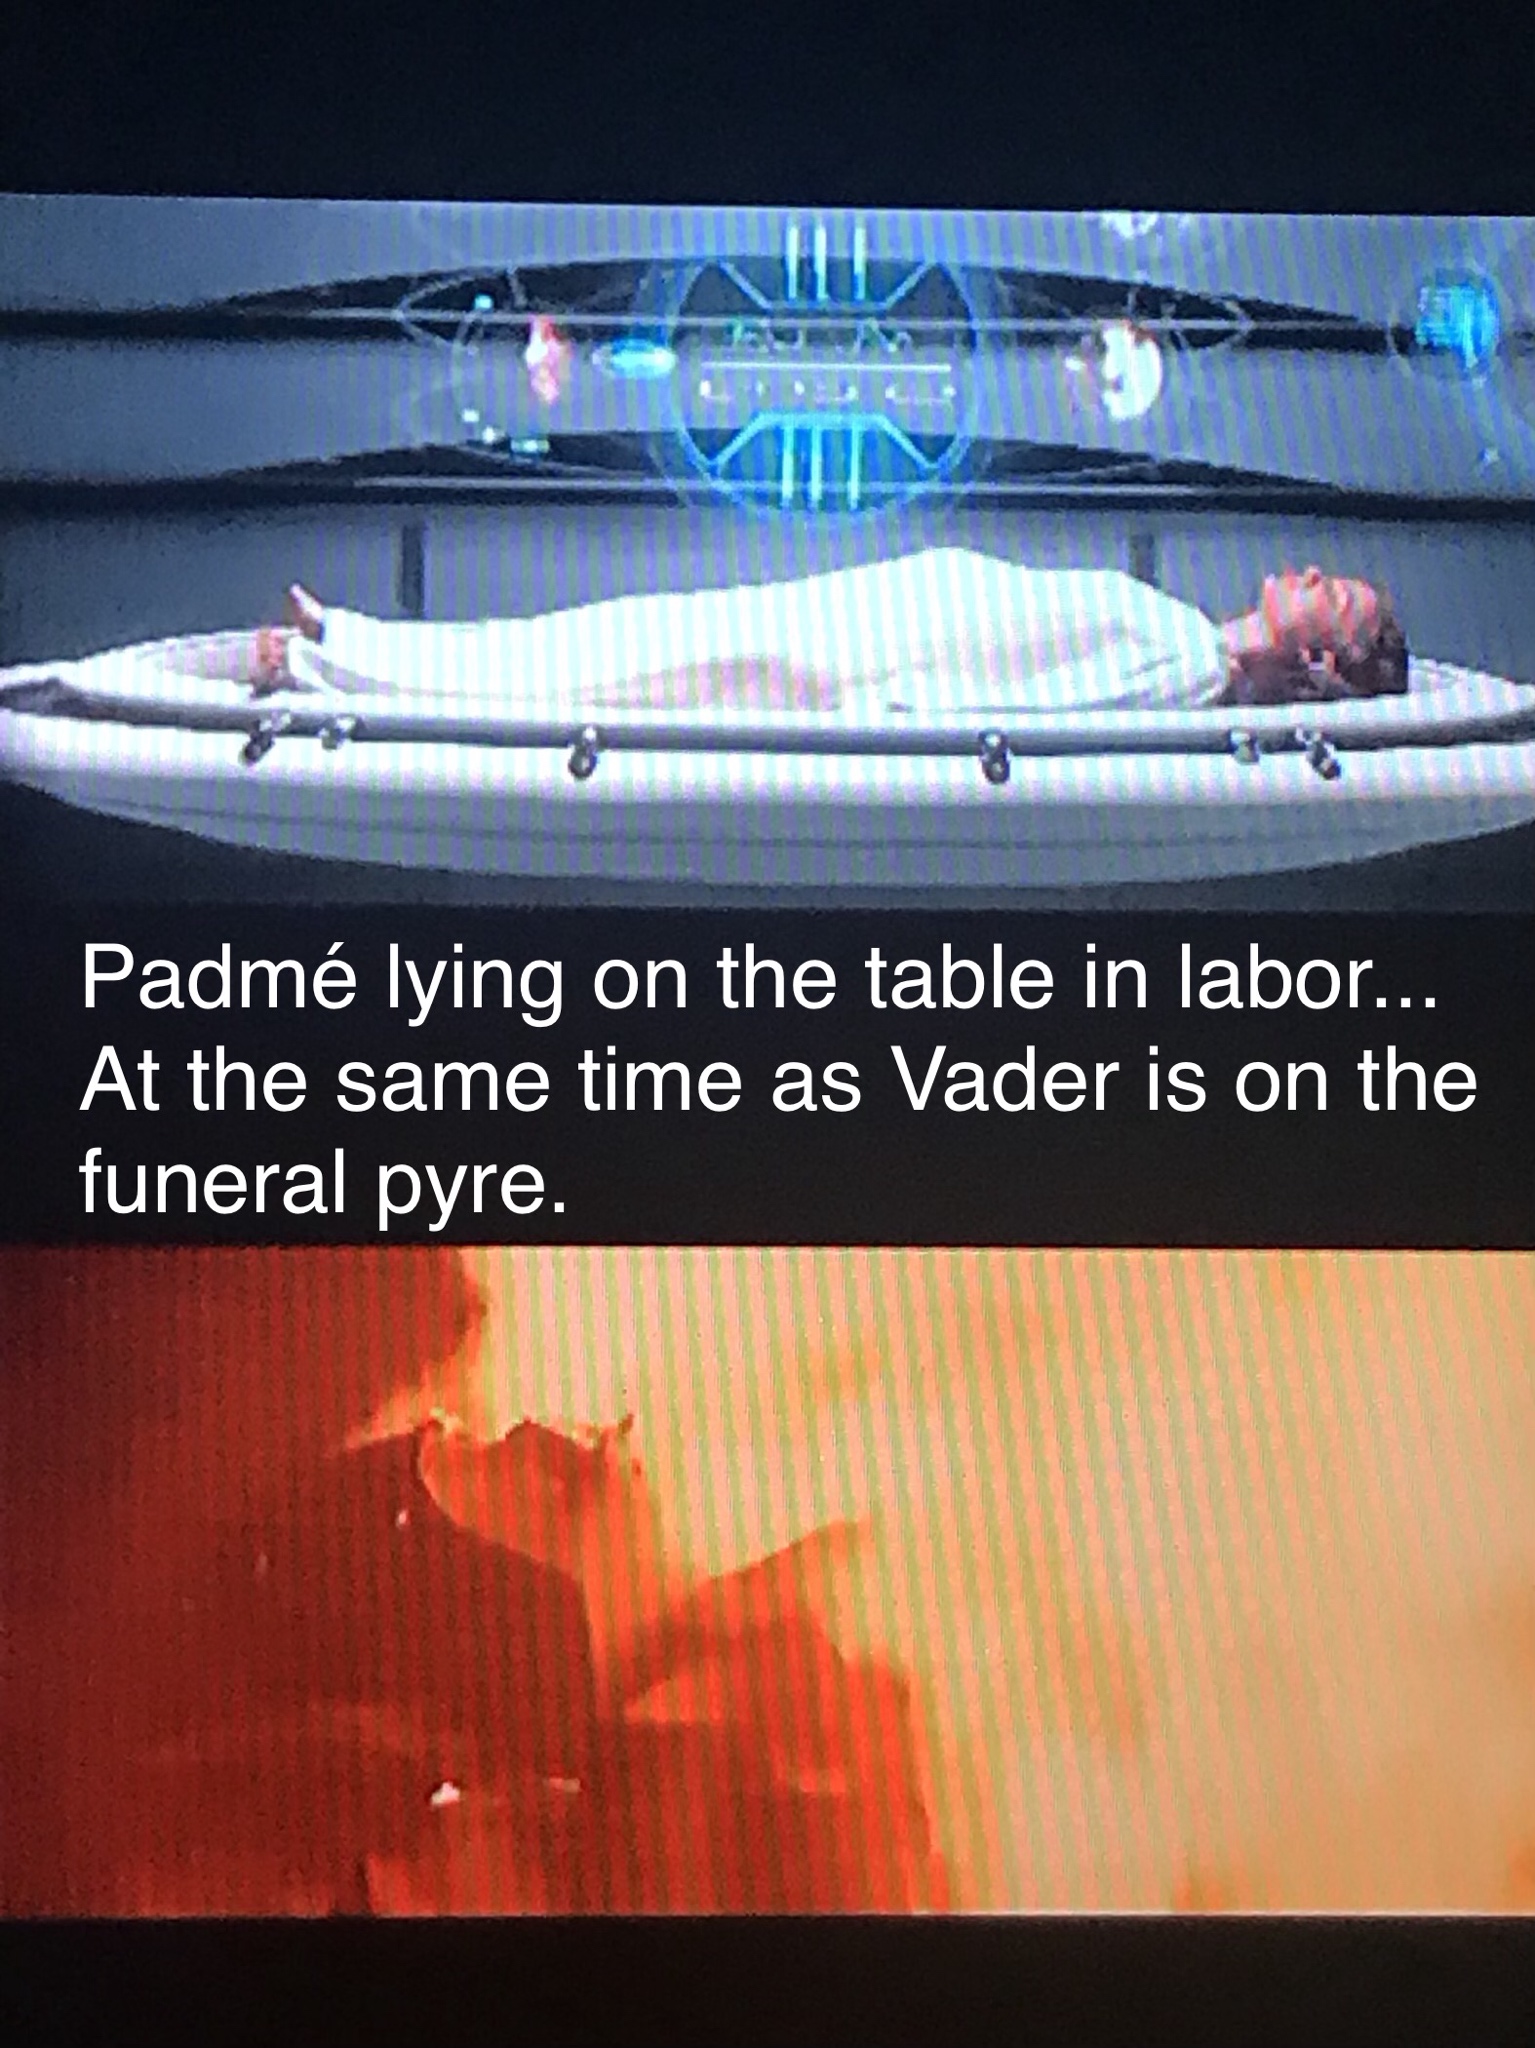 display device - Padm lying on the table in labor... At the same time as Vader is on the funeral pyre.